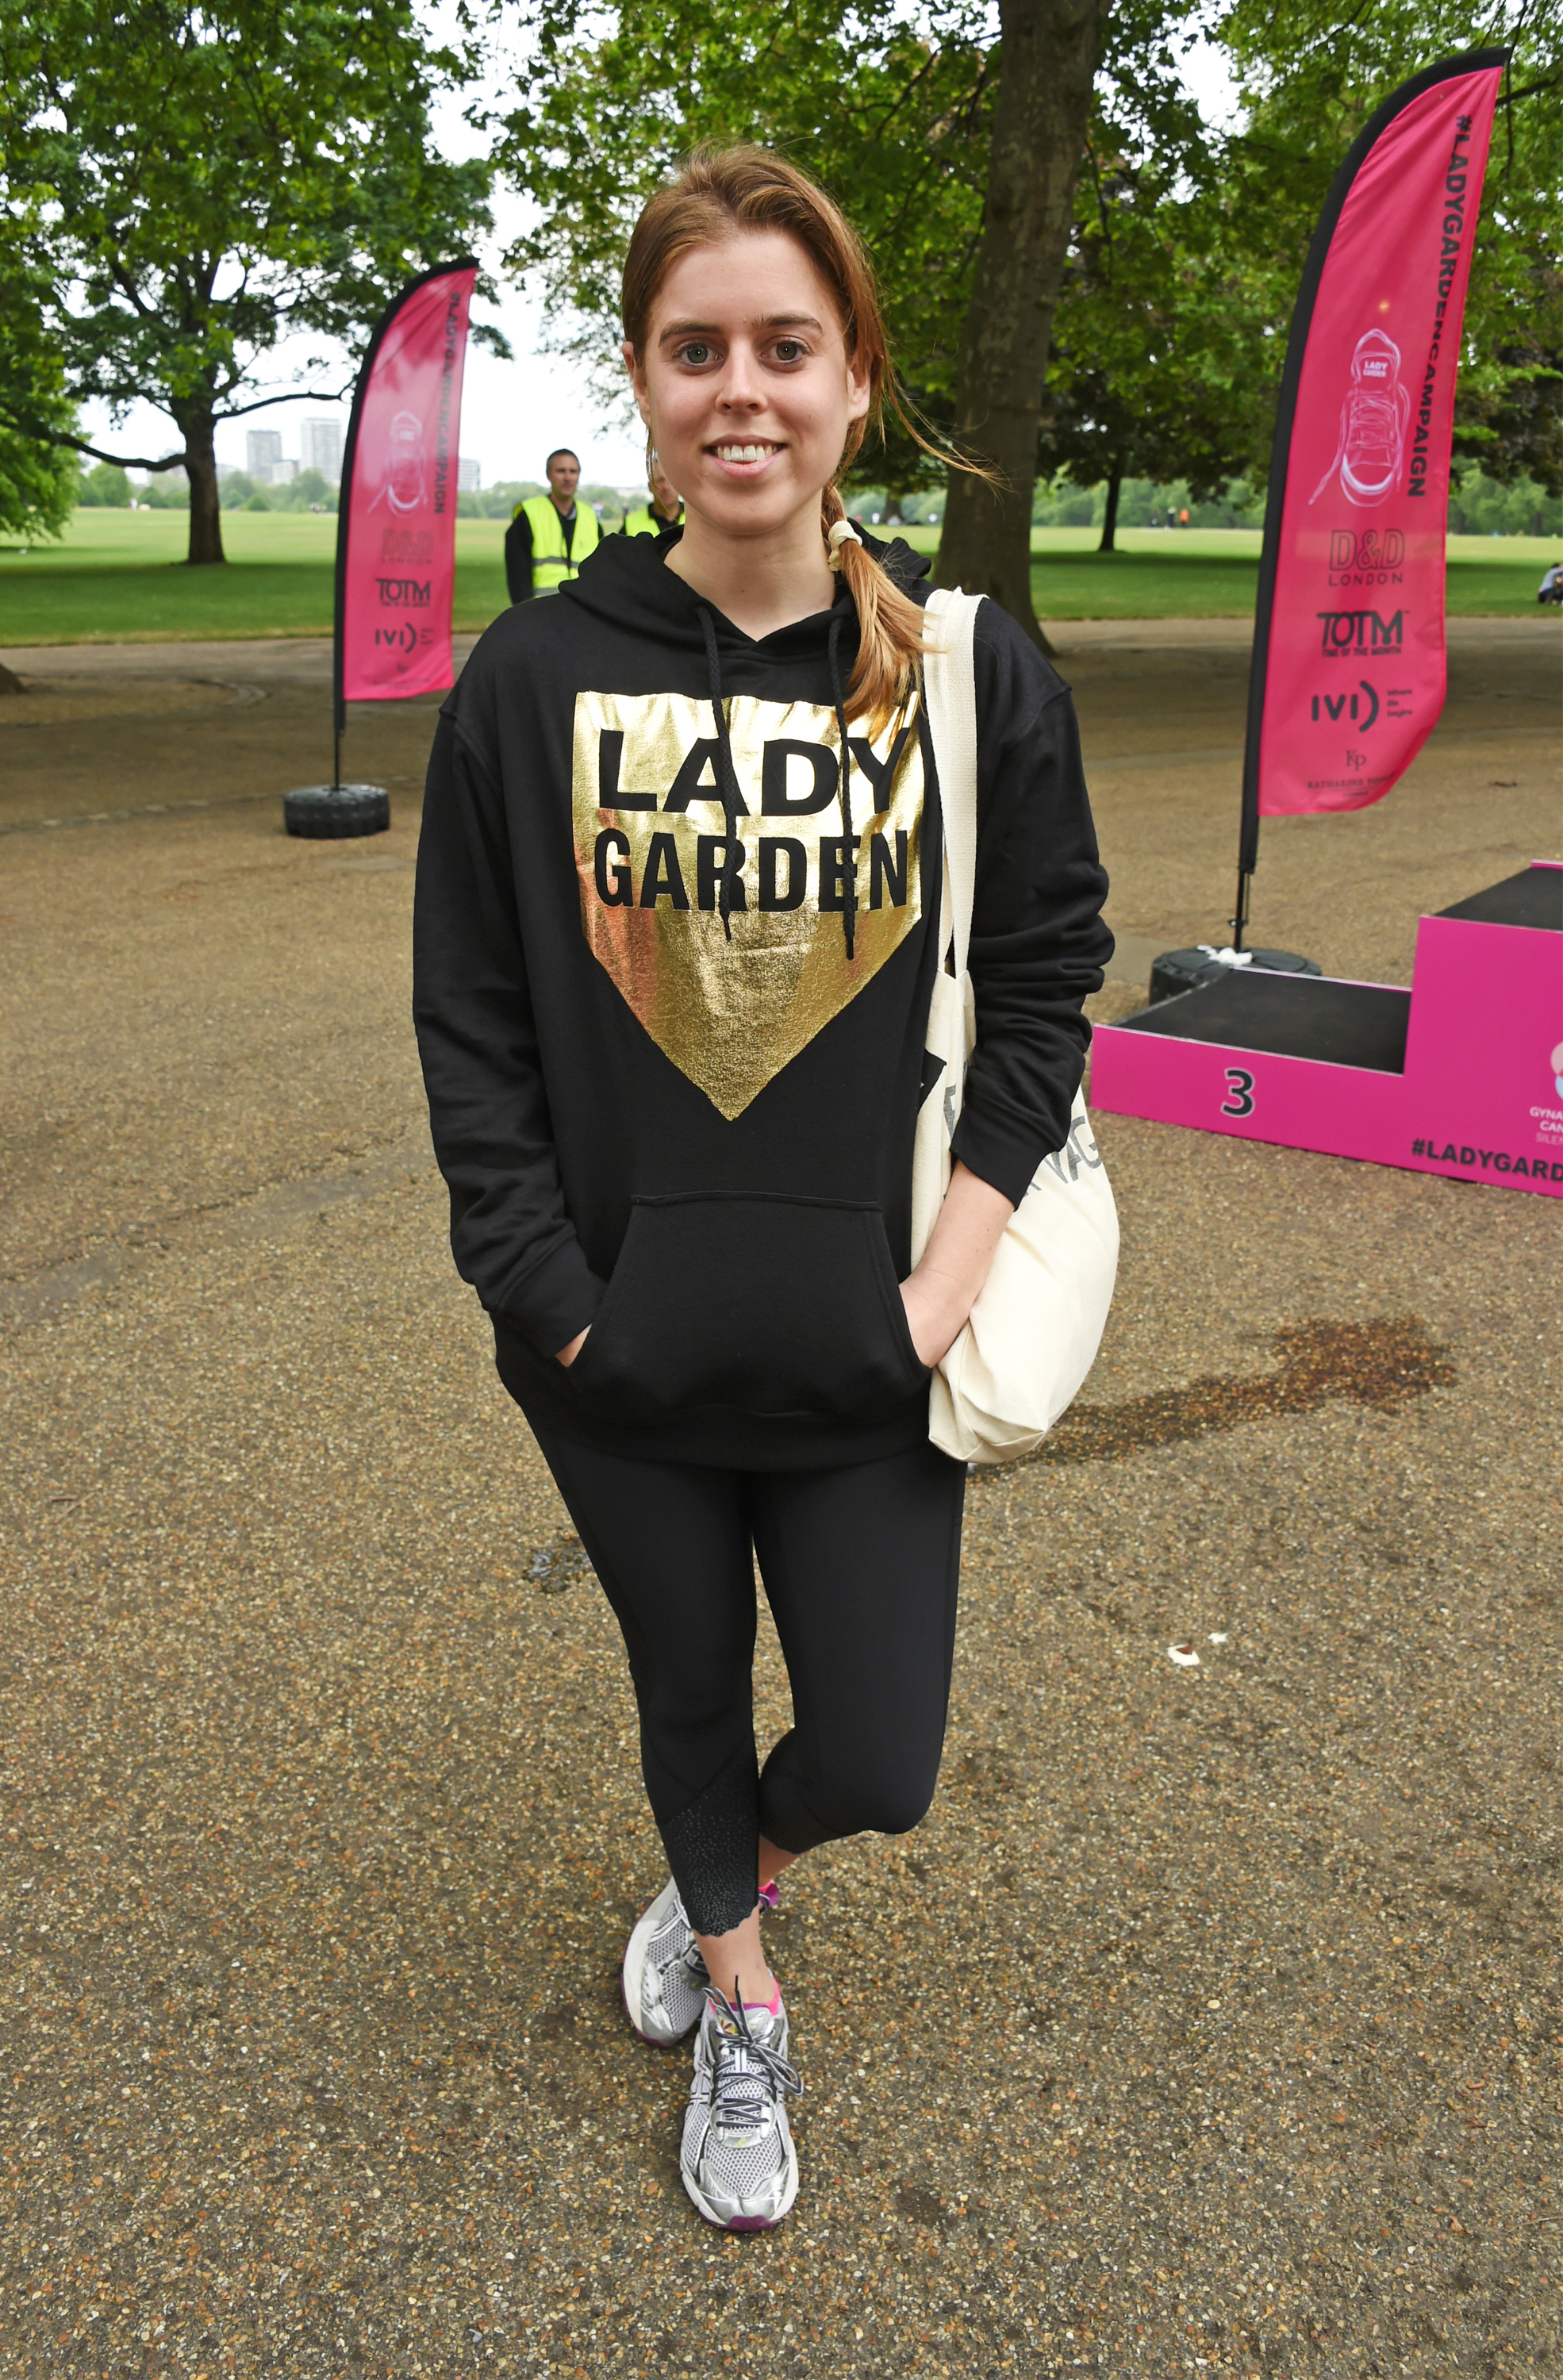 Princess Beatrice at the Lady Garden 5K & 10K Run in aid of Silent No More Gynaecological Cancer Fund in London, England on May 13, 2017 | Source: Getty Images